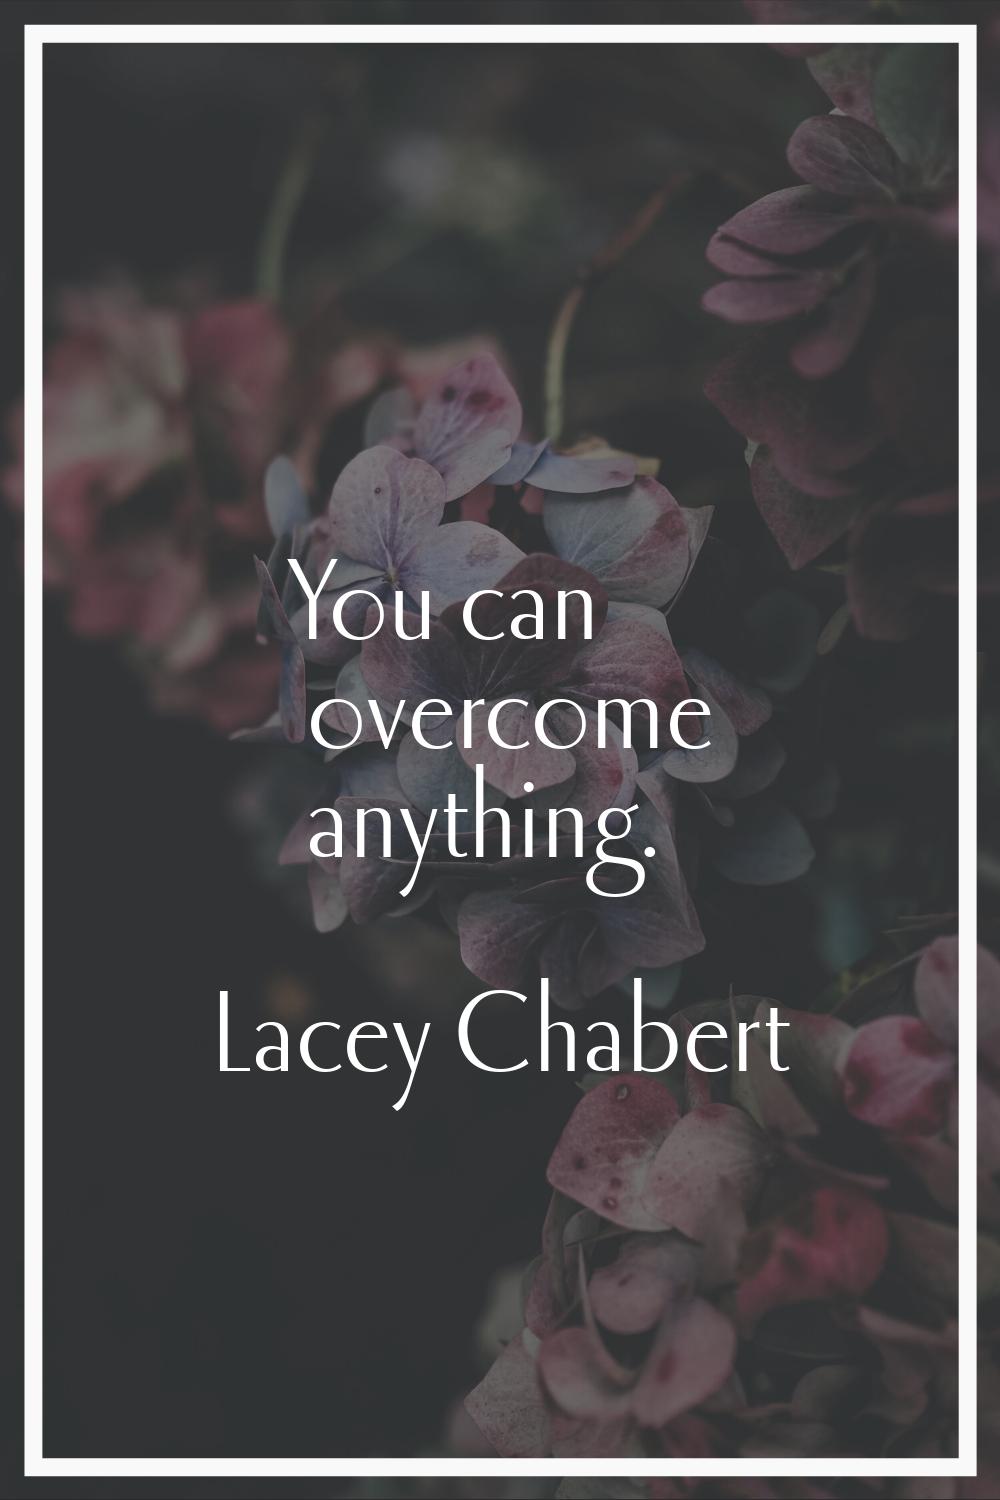 You can overcome anything.